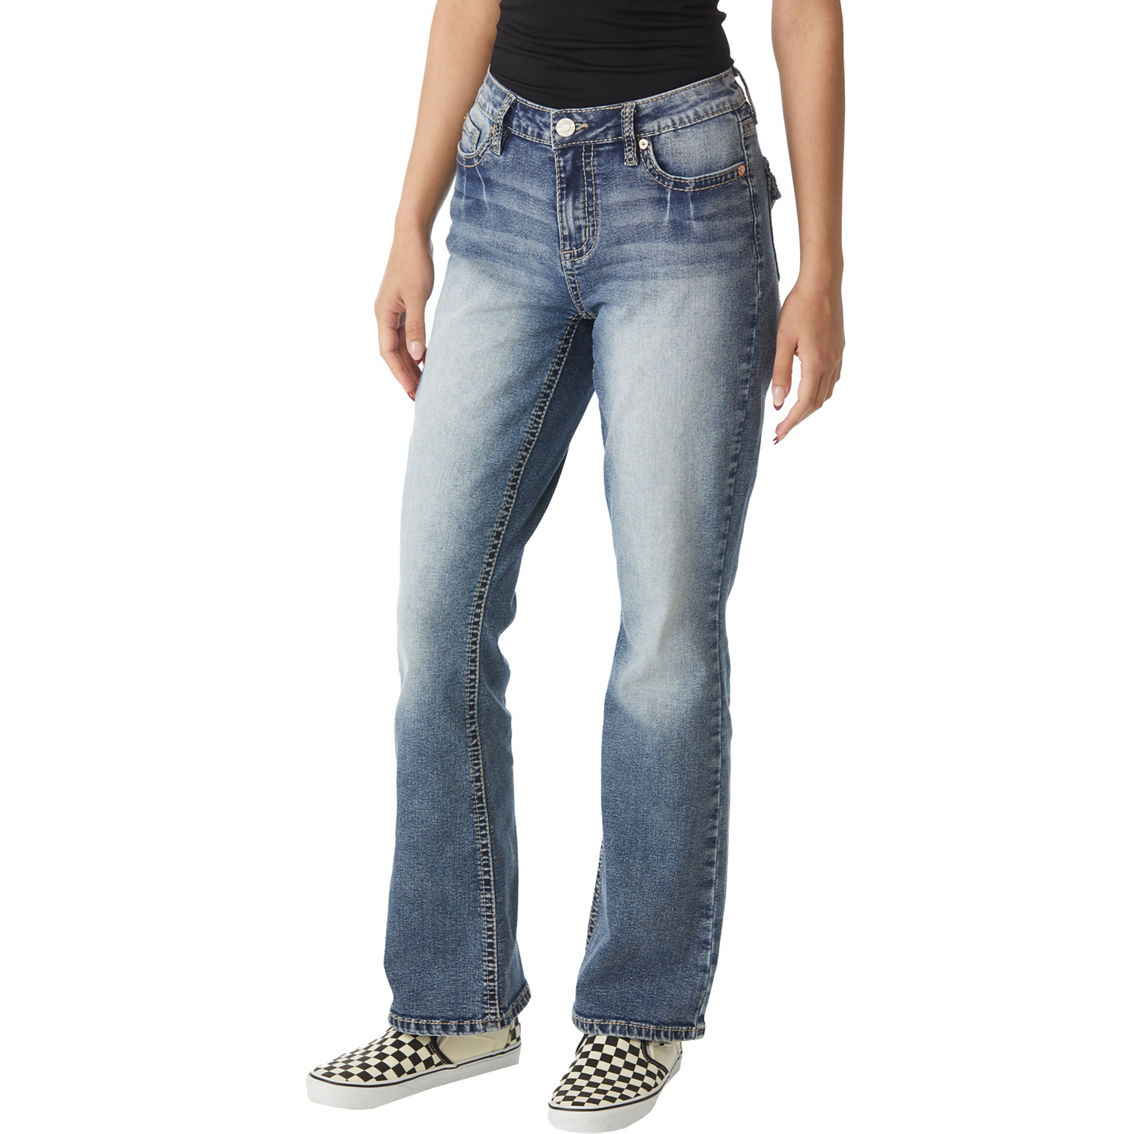 YMI Juniors Heavy Stitch Mid-Rise Bootcut Jeans with Flap Back Pockets - Image 3 of 3